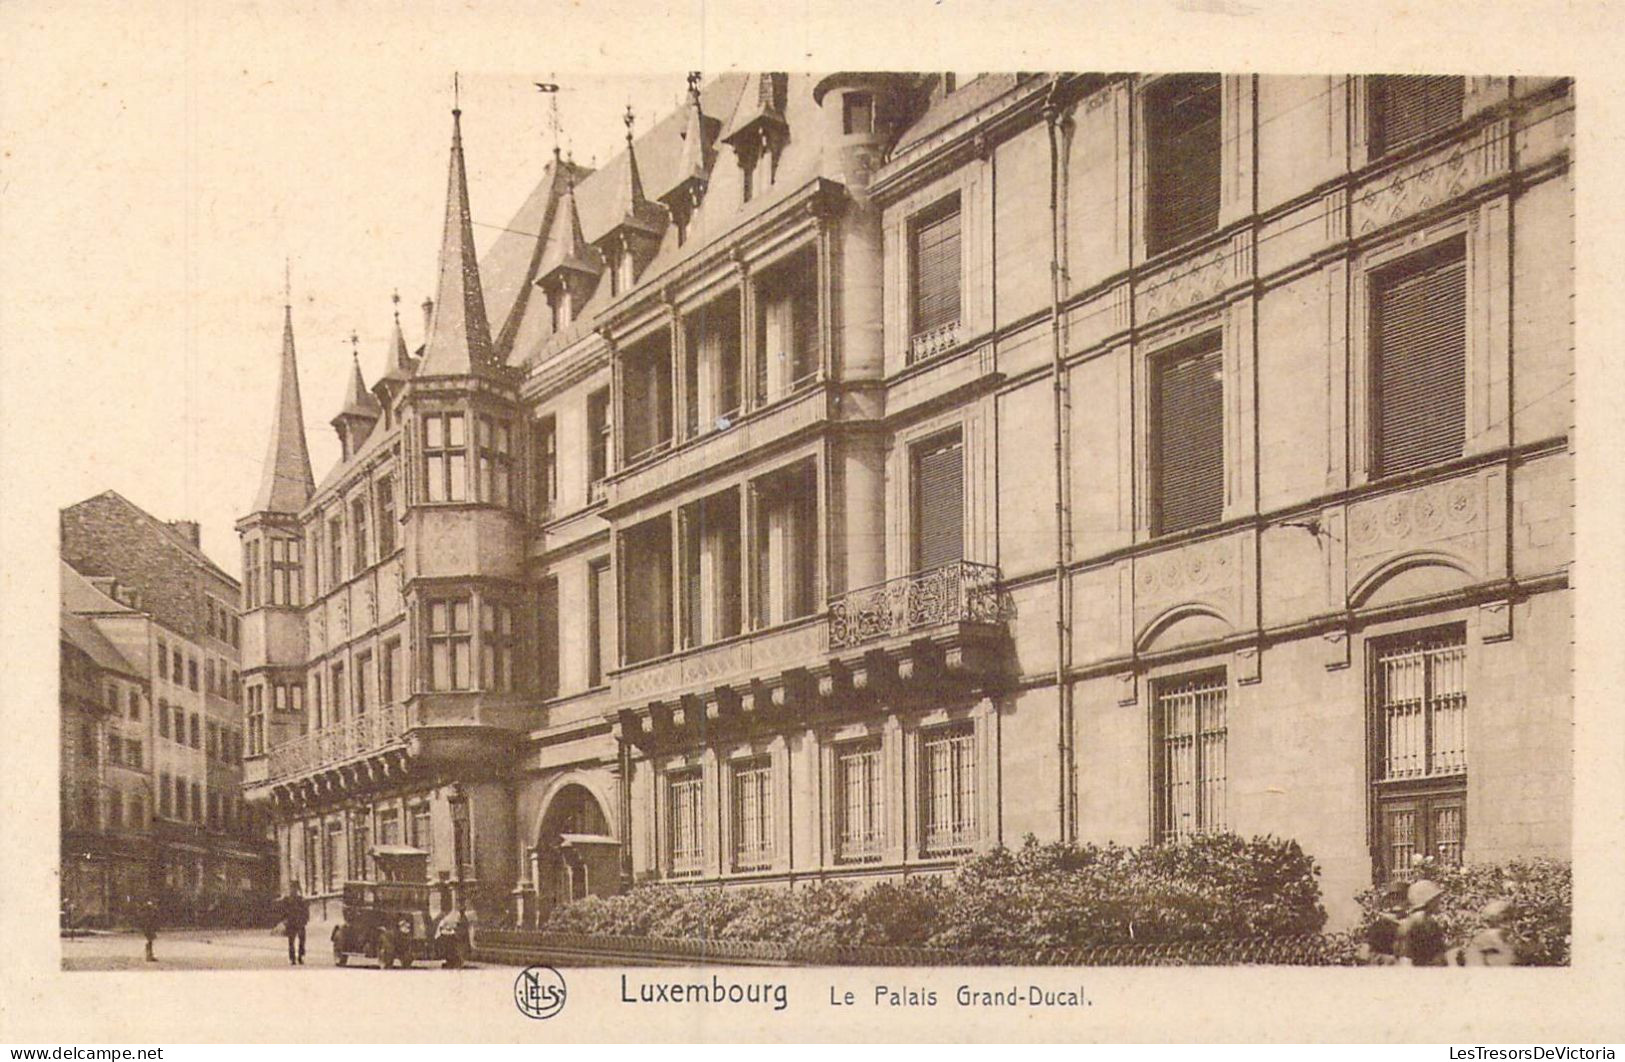 LUXEMBOURG - Le Palais - Grand-Ducal - Carte Postale Ancienne - Luxemburgo - Ciudad